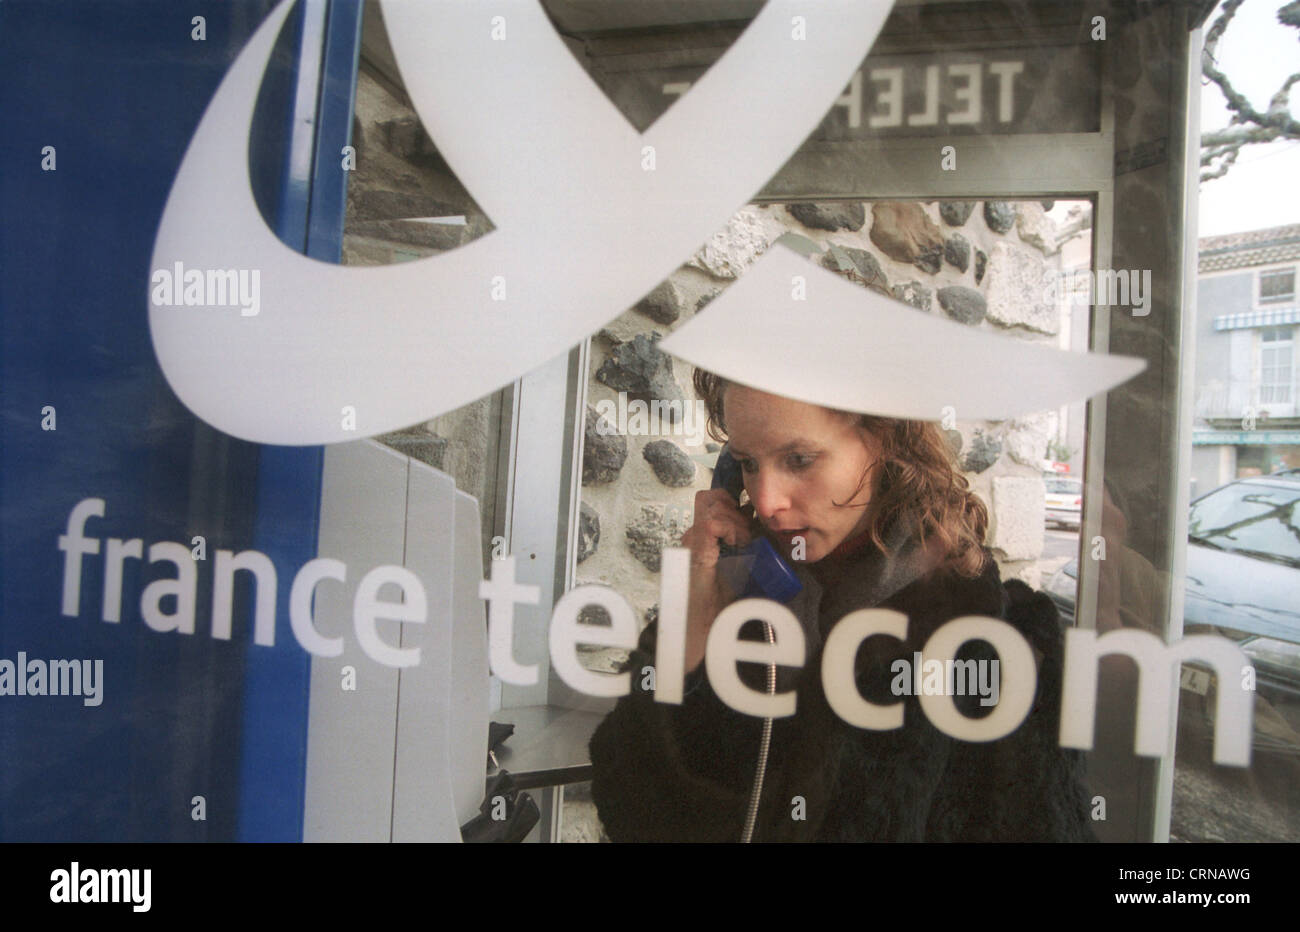 French woman in the phone booth france telecom Stock Photo